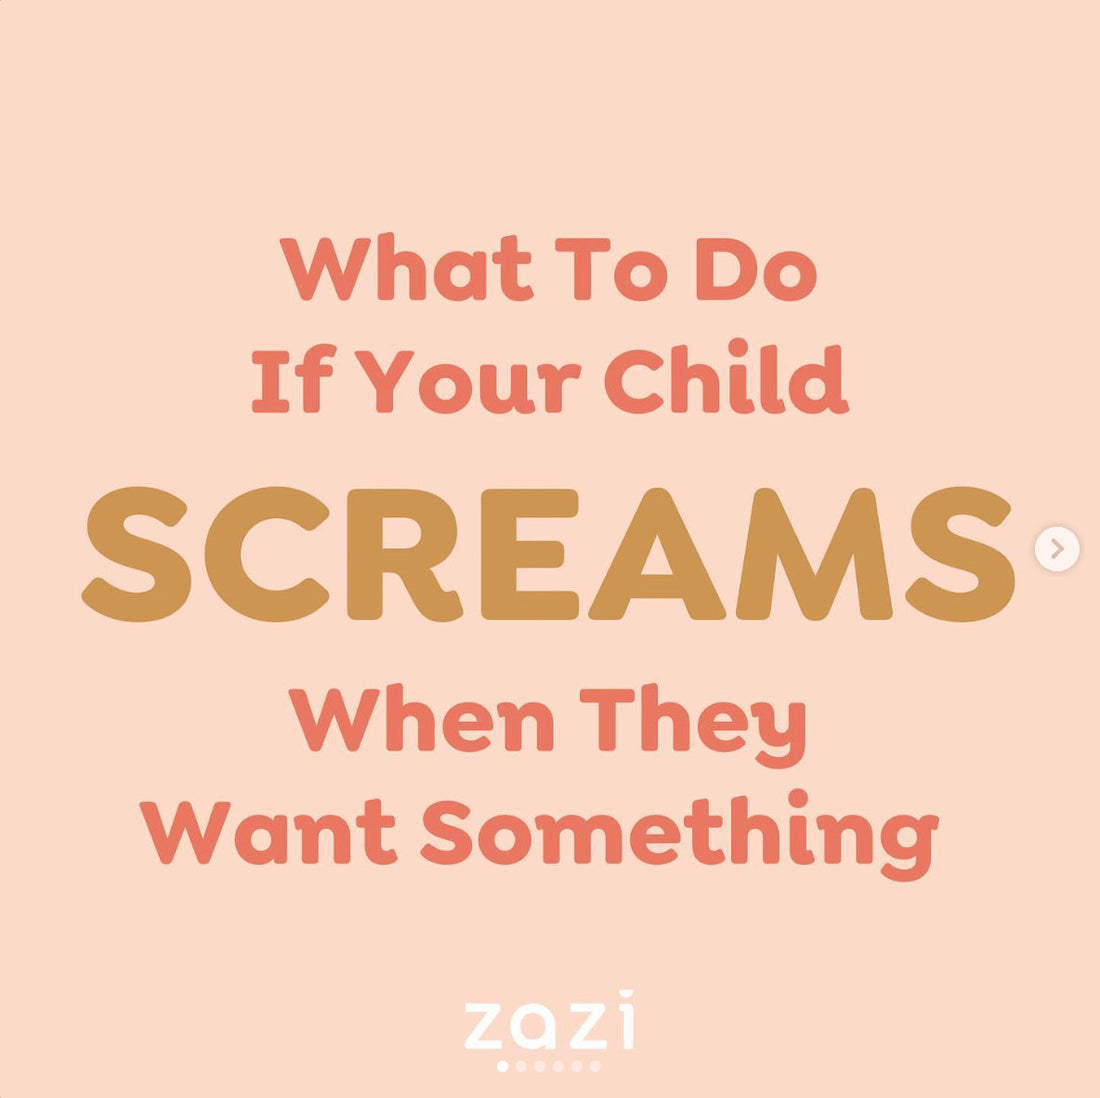 If your Child Screams when they want something